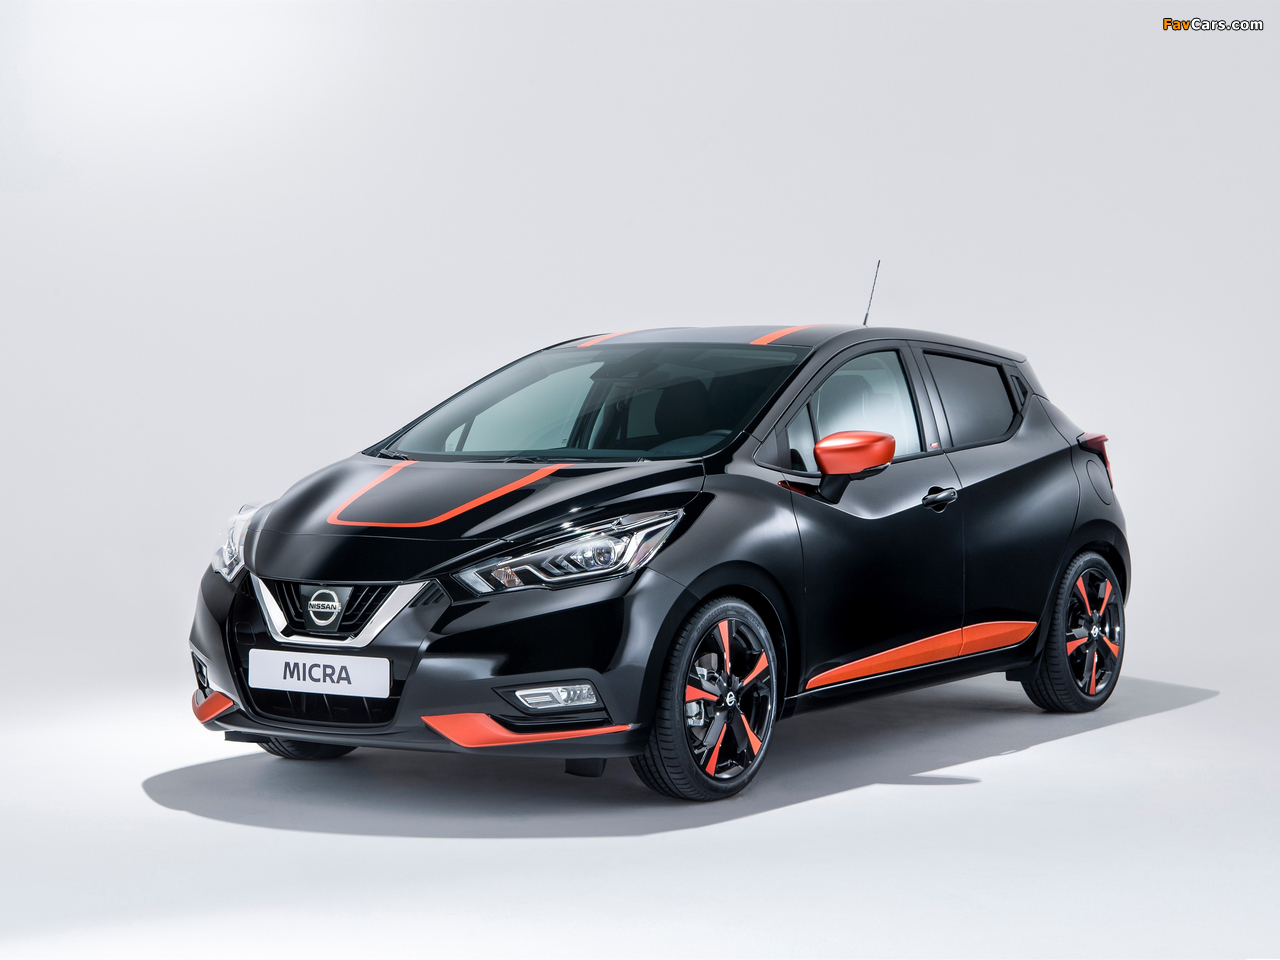 Pictures of Nissan Micra 